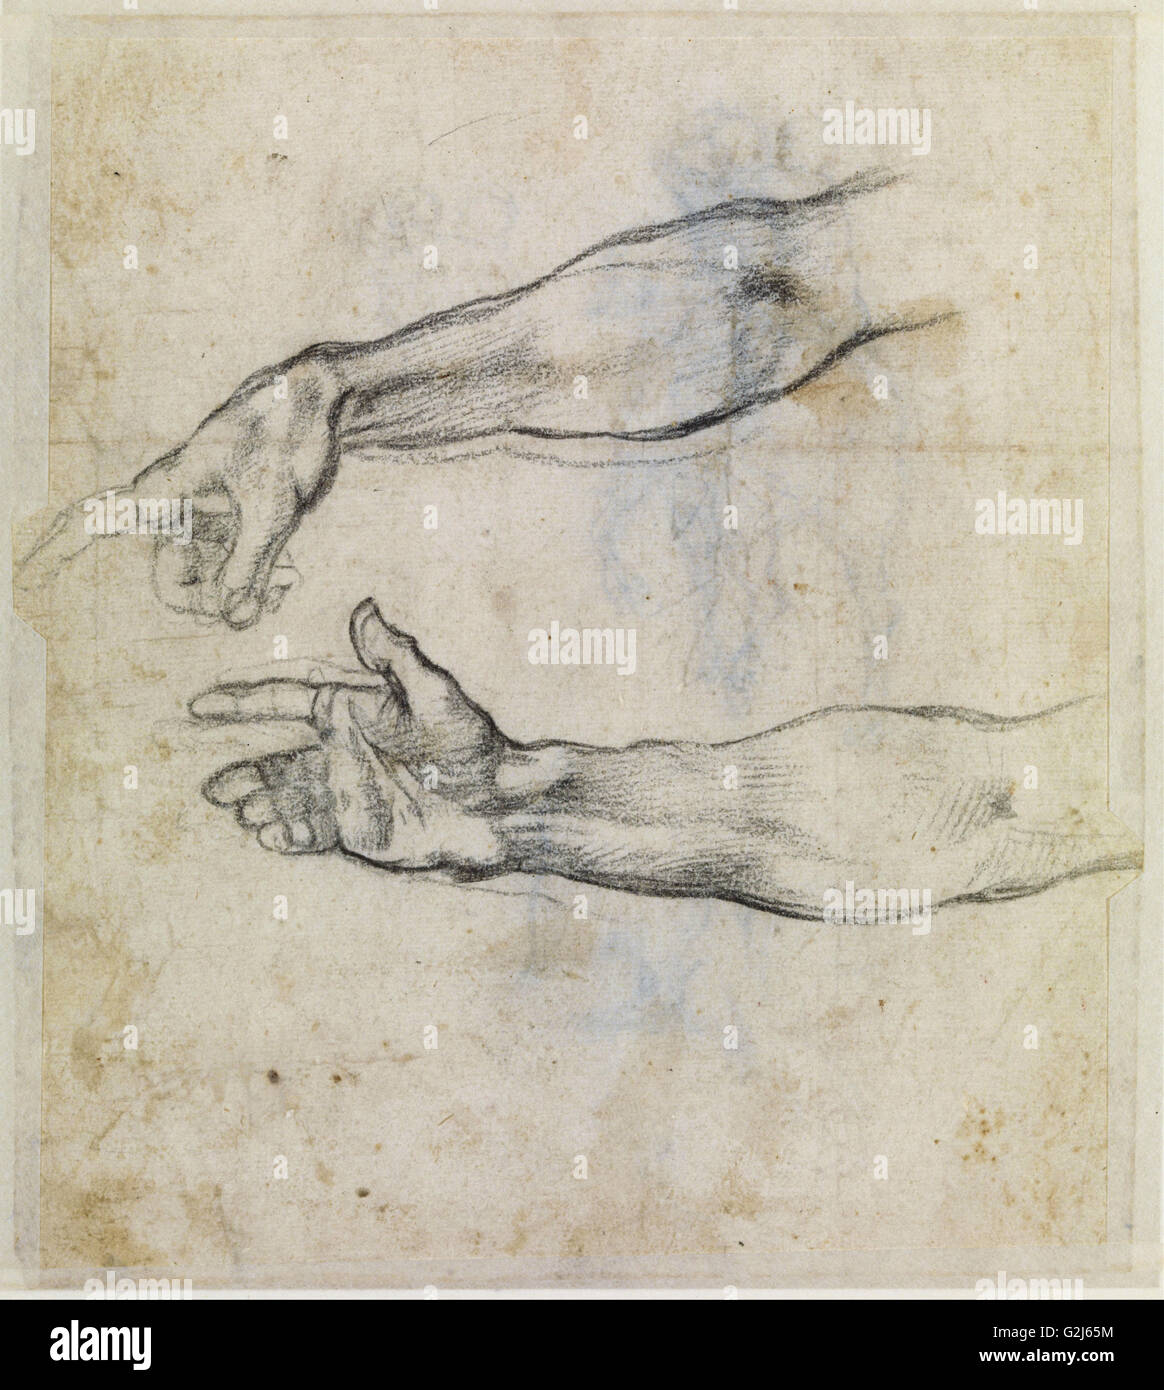 Michelangelo Buonarroti - Studies of an outstretched arm for the fresco  'The Drunkenness Museum Boijmans Van Beuningen - Rotterdam Stock Photo -  Alamy